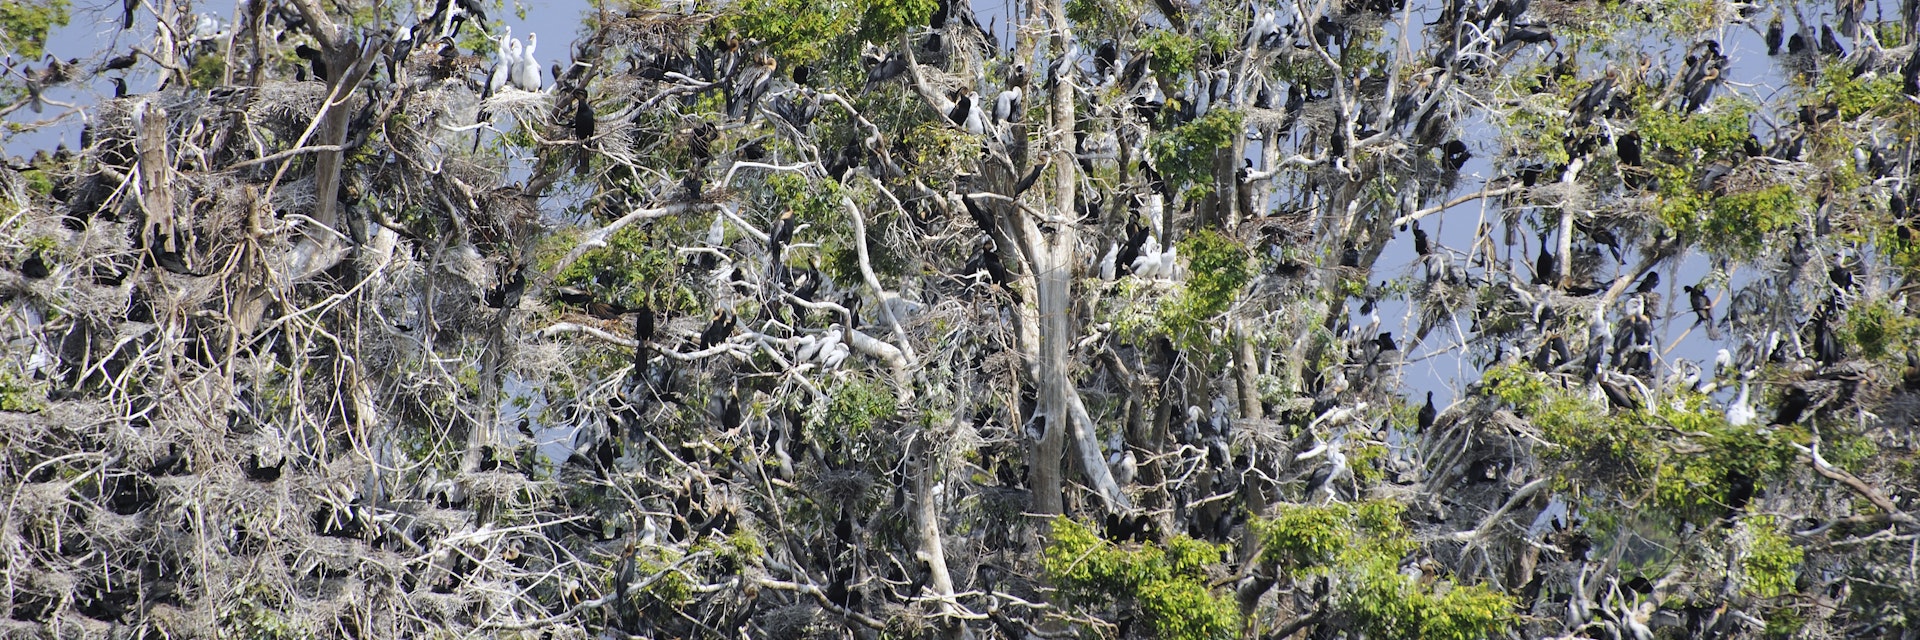 Flocks of nesting pelicans, comorants, and herons crowd the canopies of submered trees at Prek Toal Bird Sanctuary on Tongle Sap lake.